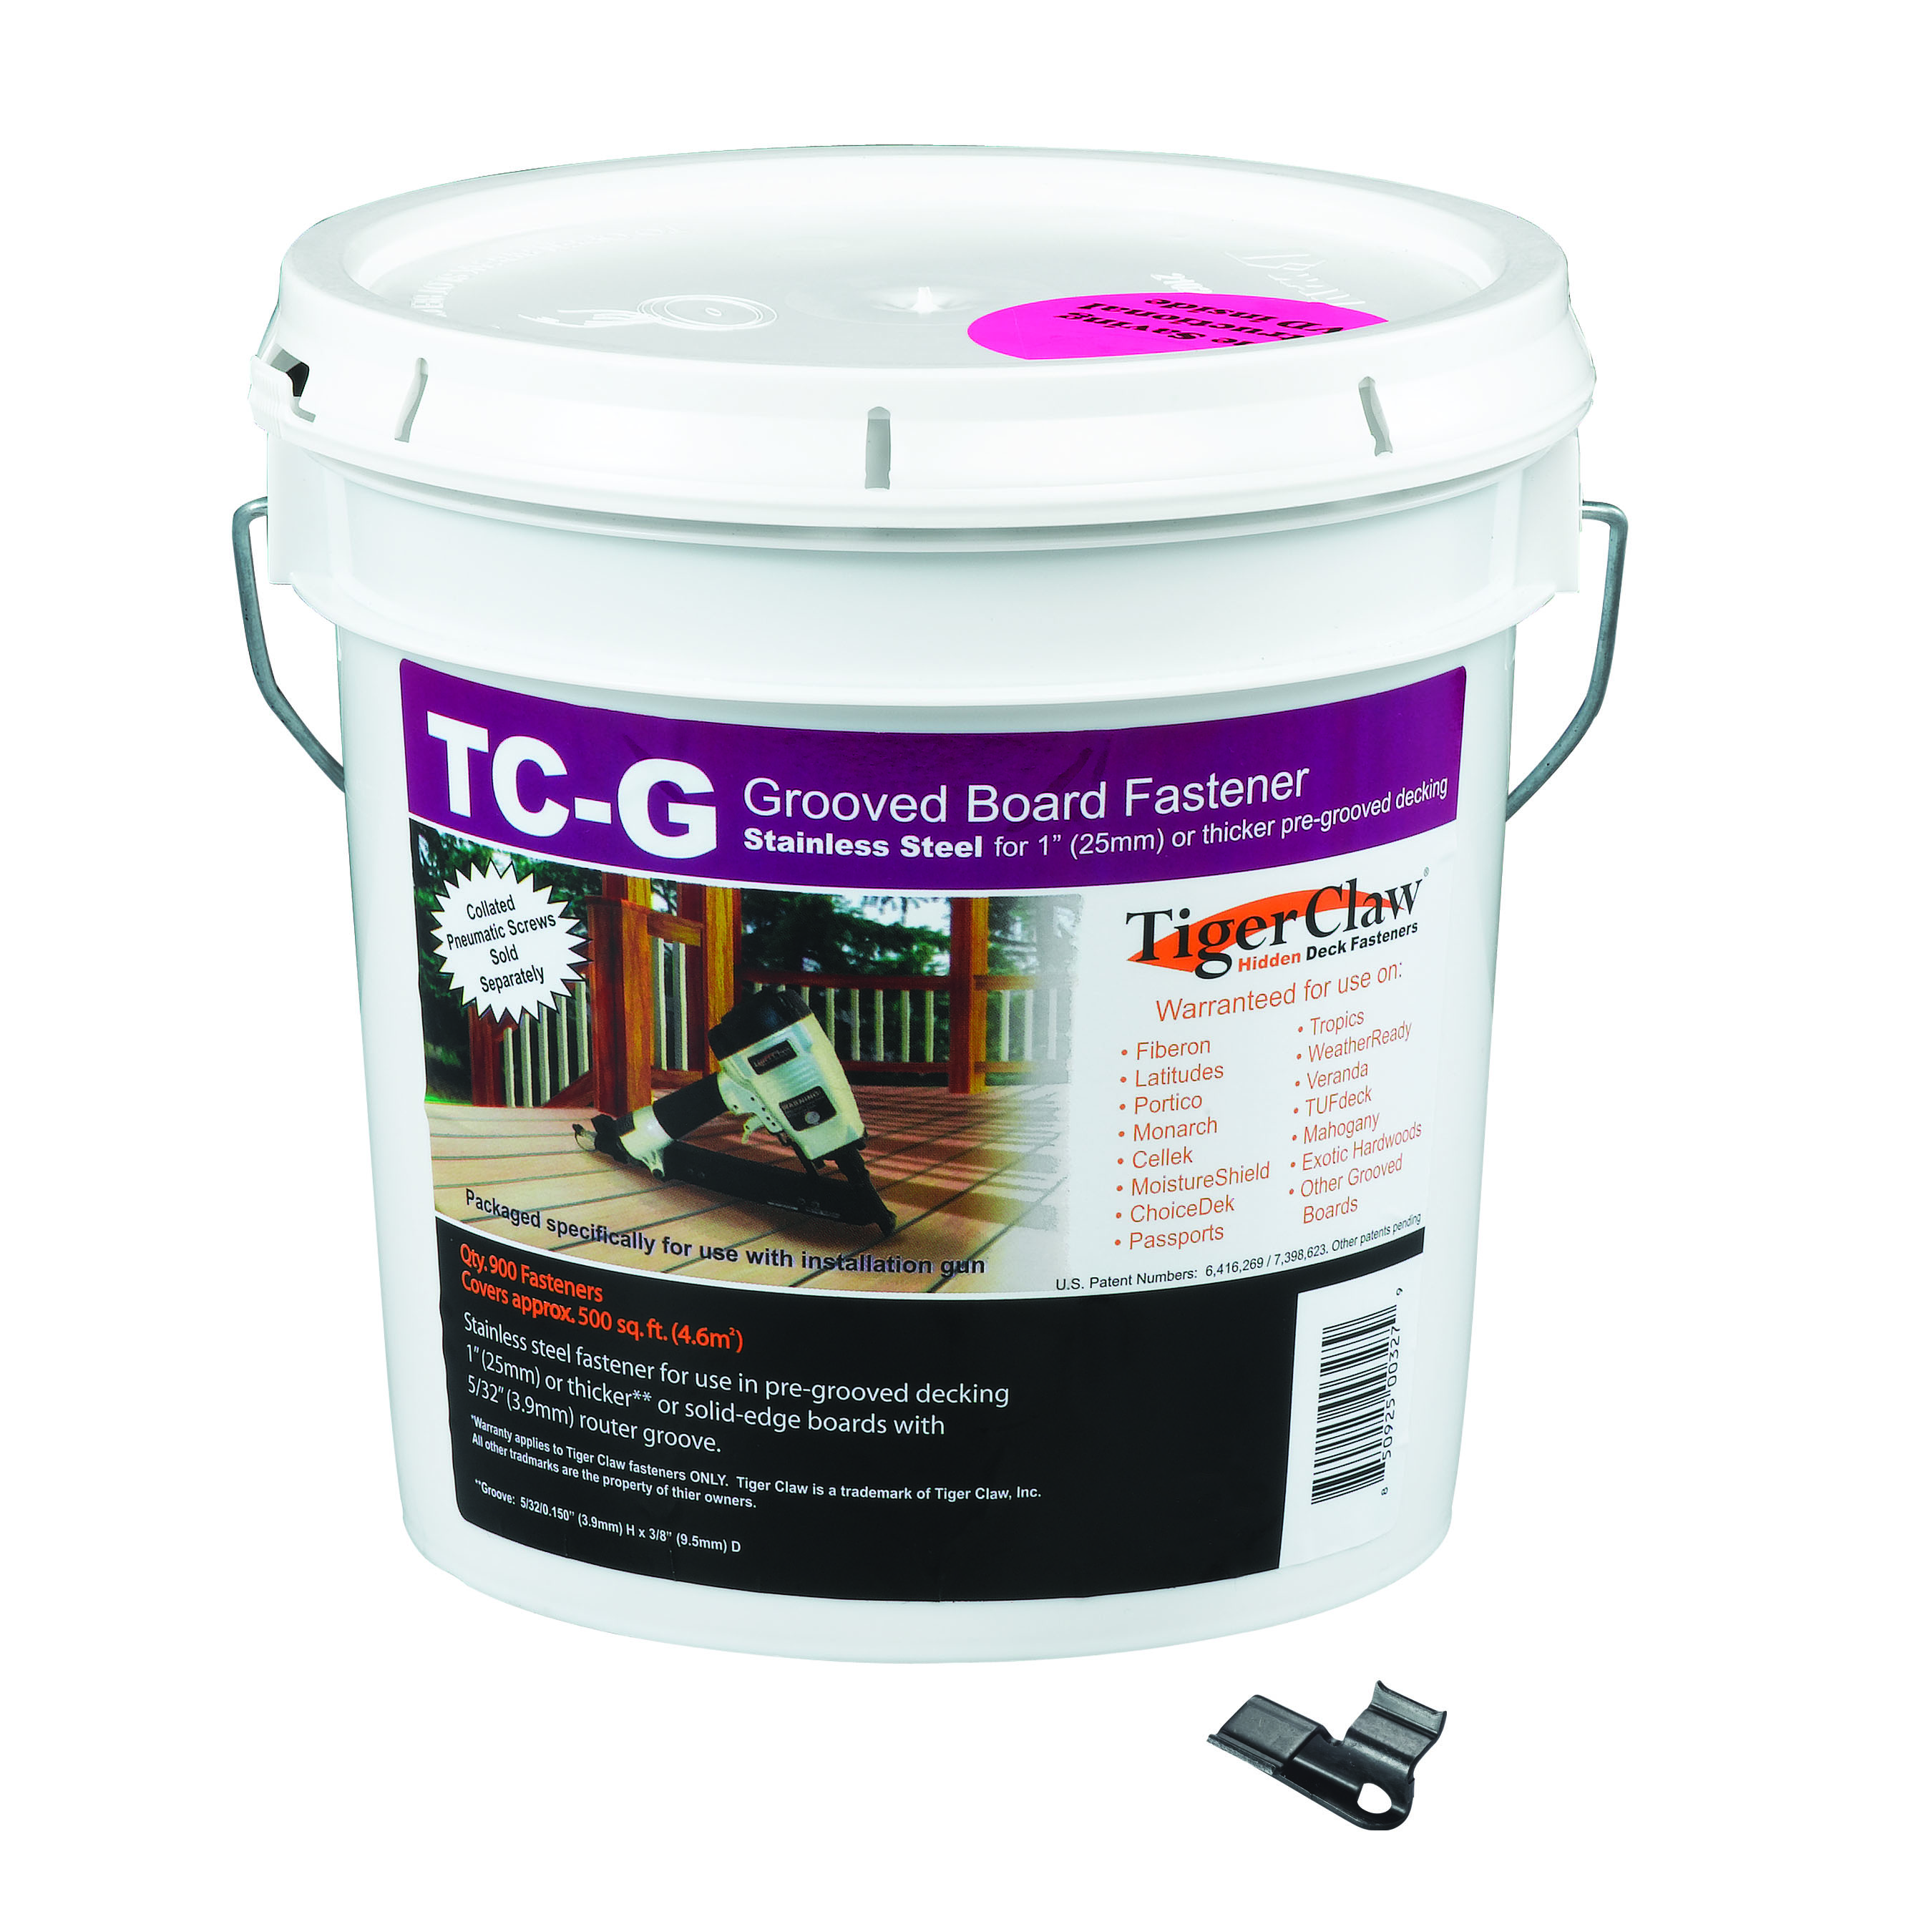 Tiger Claw TC-G Bucket for Grooved Decking, 900 clips